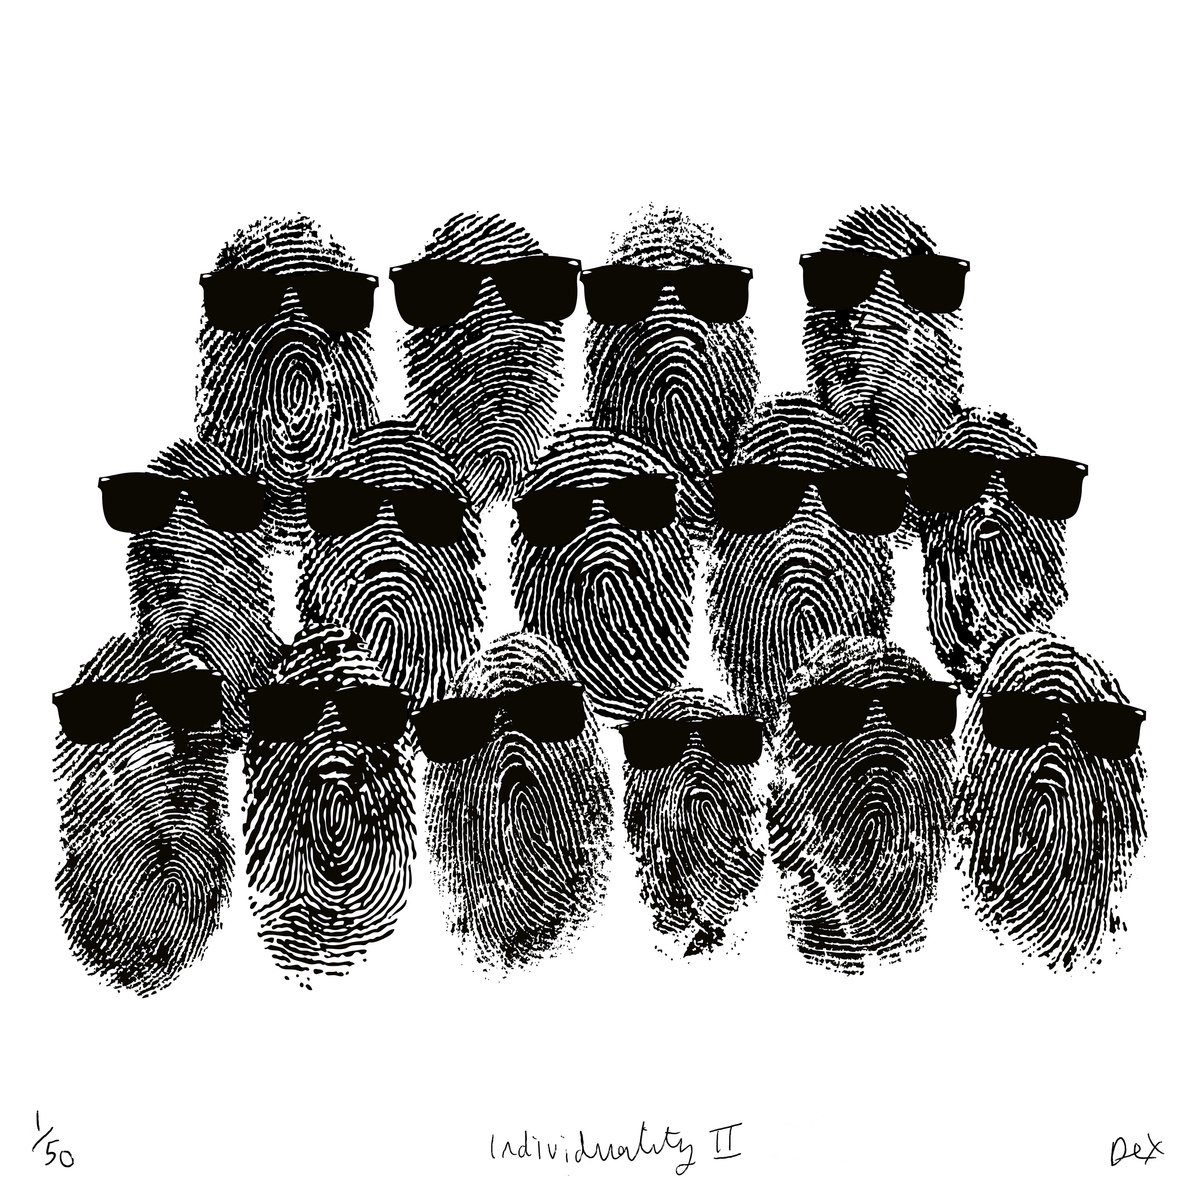 Individuality II by Dex